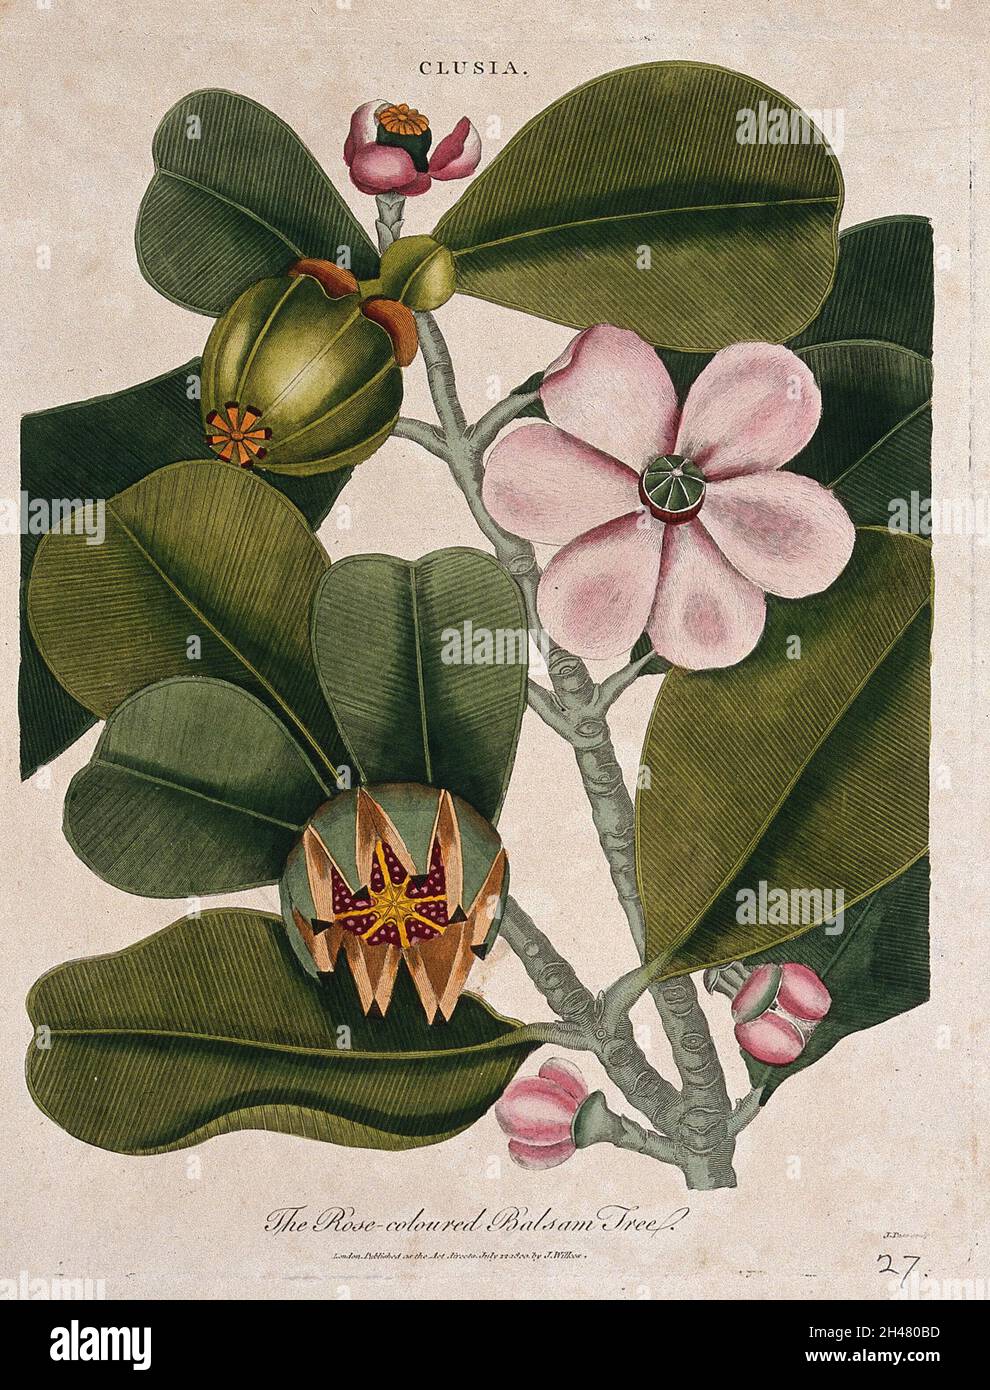 Rock balsam plant (Clusia rosea): flowering and fruiting branch. Coloured etching by J. Pass, c. 1800, after J. Ihle. Stock Photo